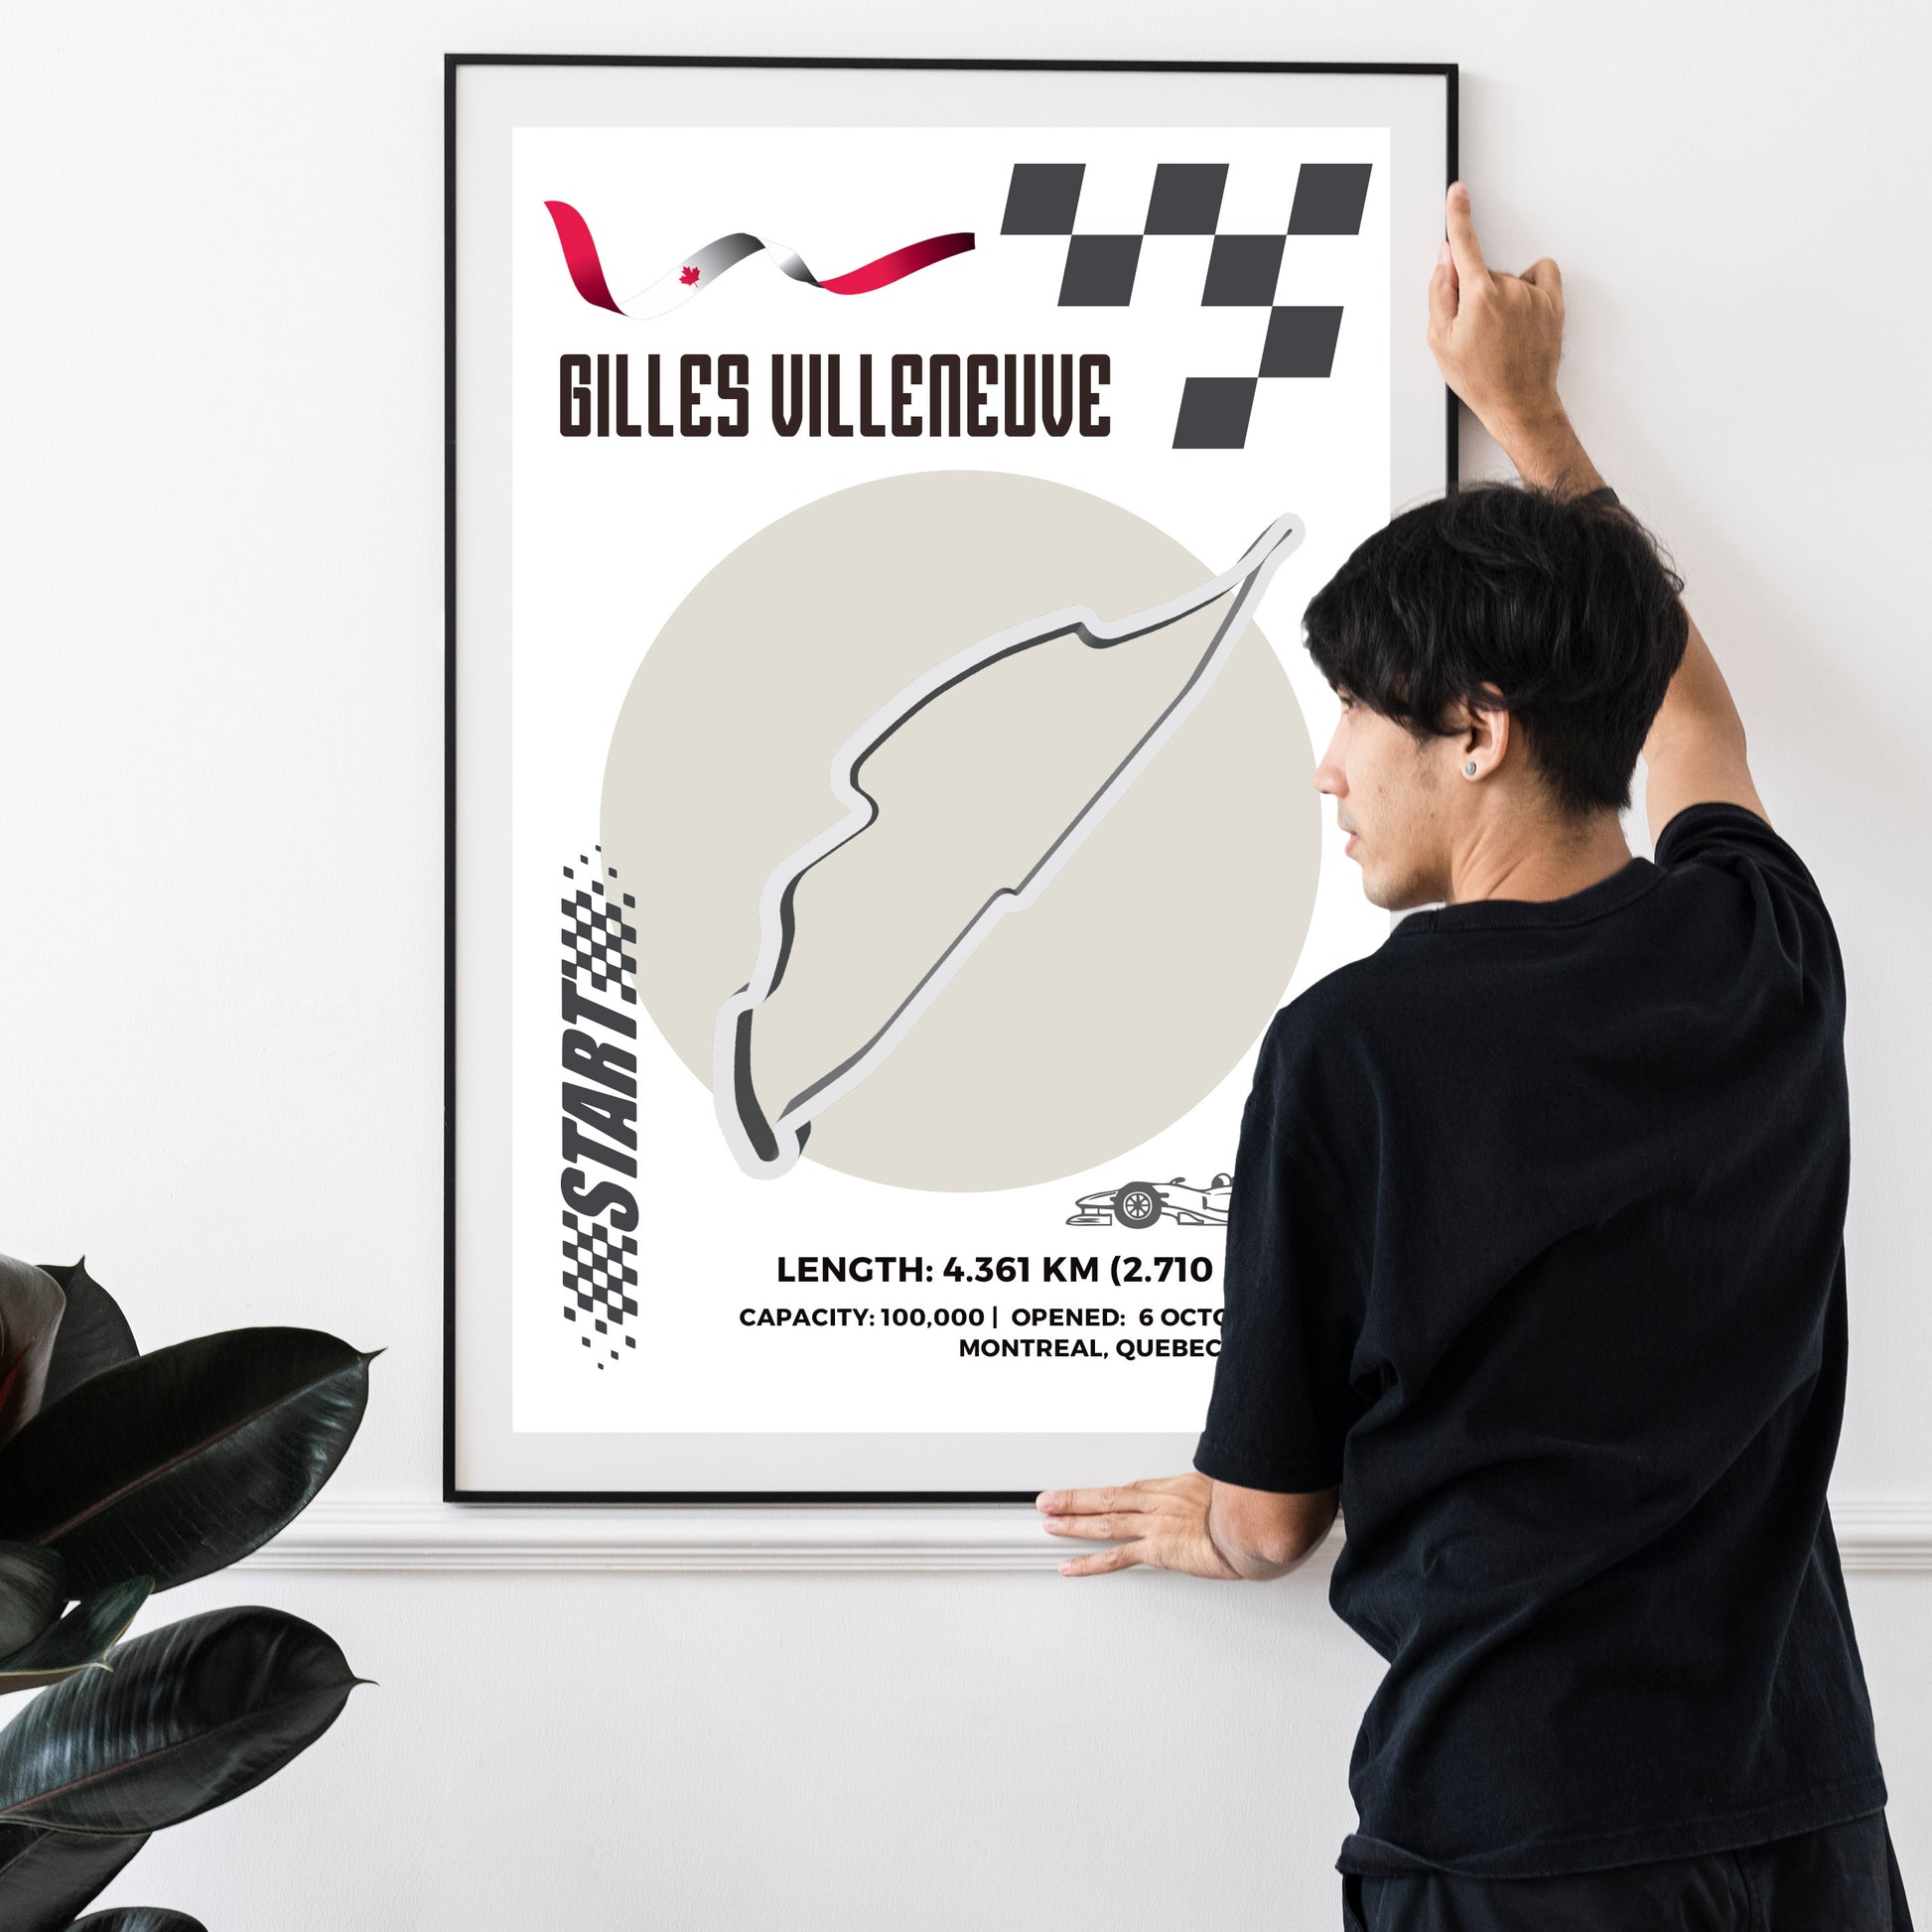 Discover the thrill of Formula One with our Gilles Villeneuve Circuit F1 Posters. Featuring a detailed map of F1 racing tracks and a circuit guide, these posters are a dream come true for any fan. 